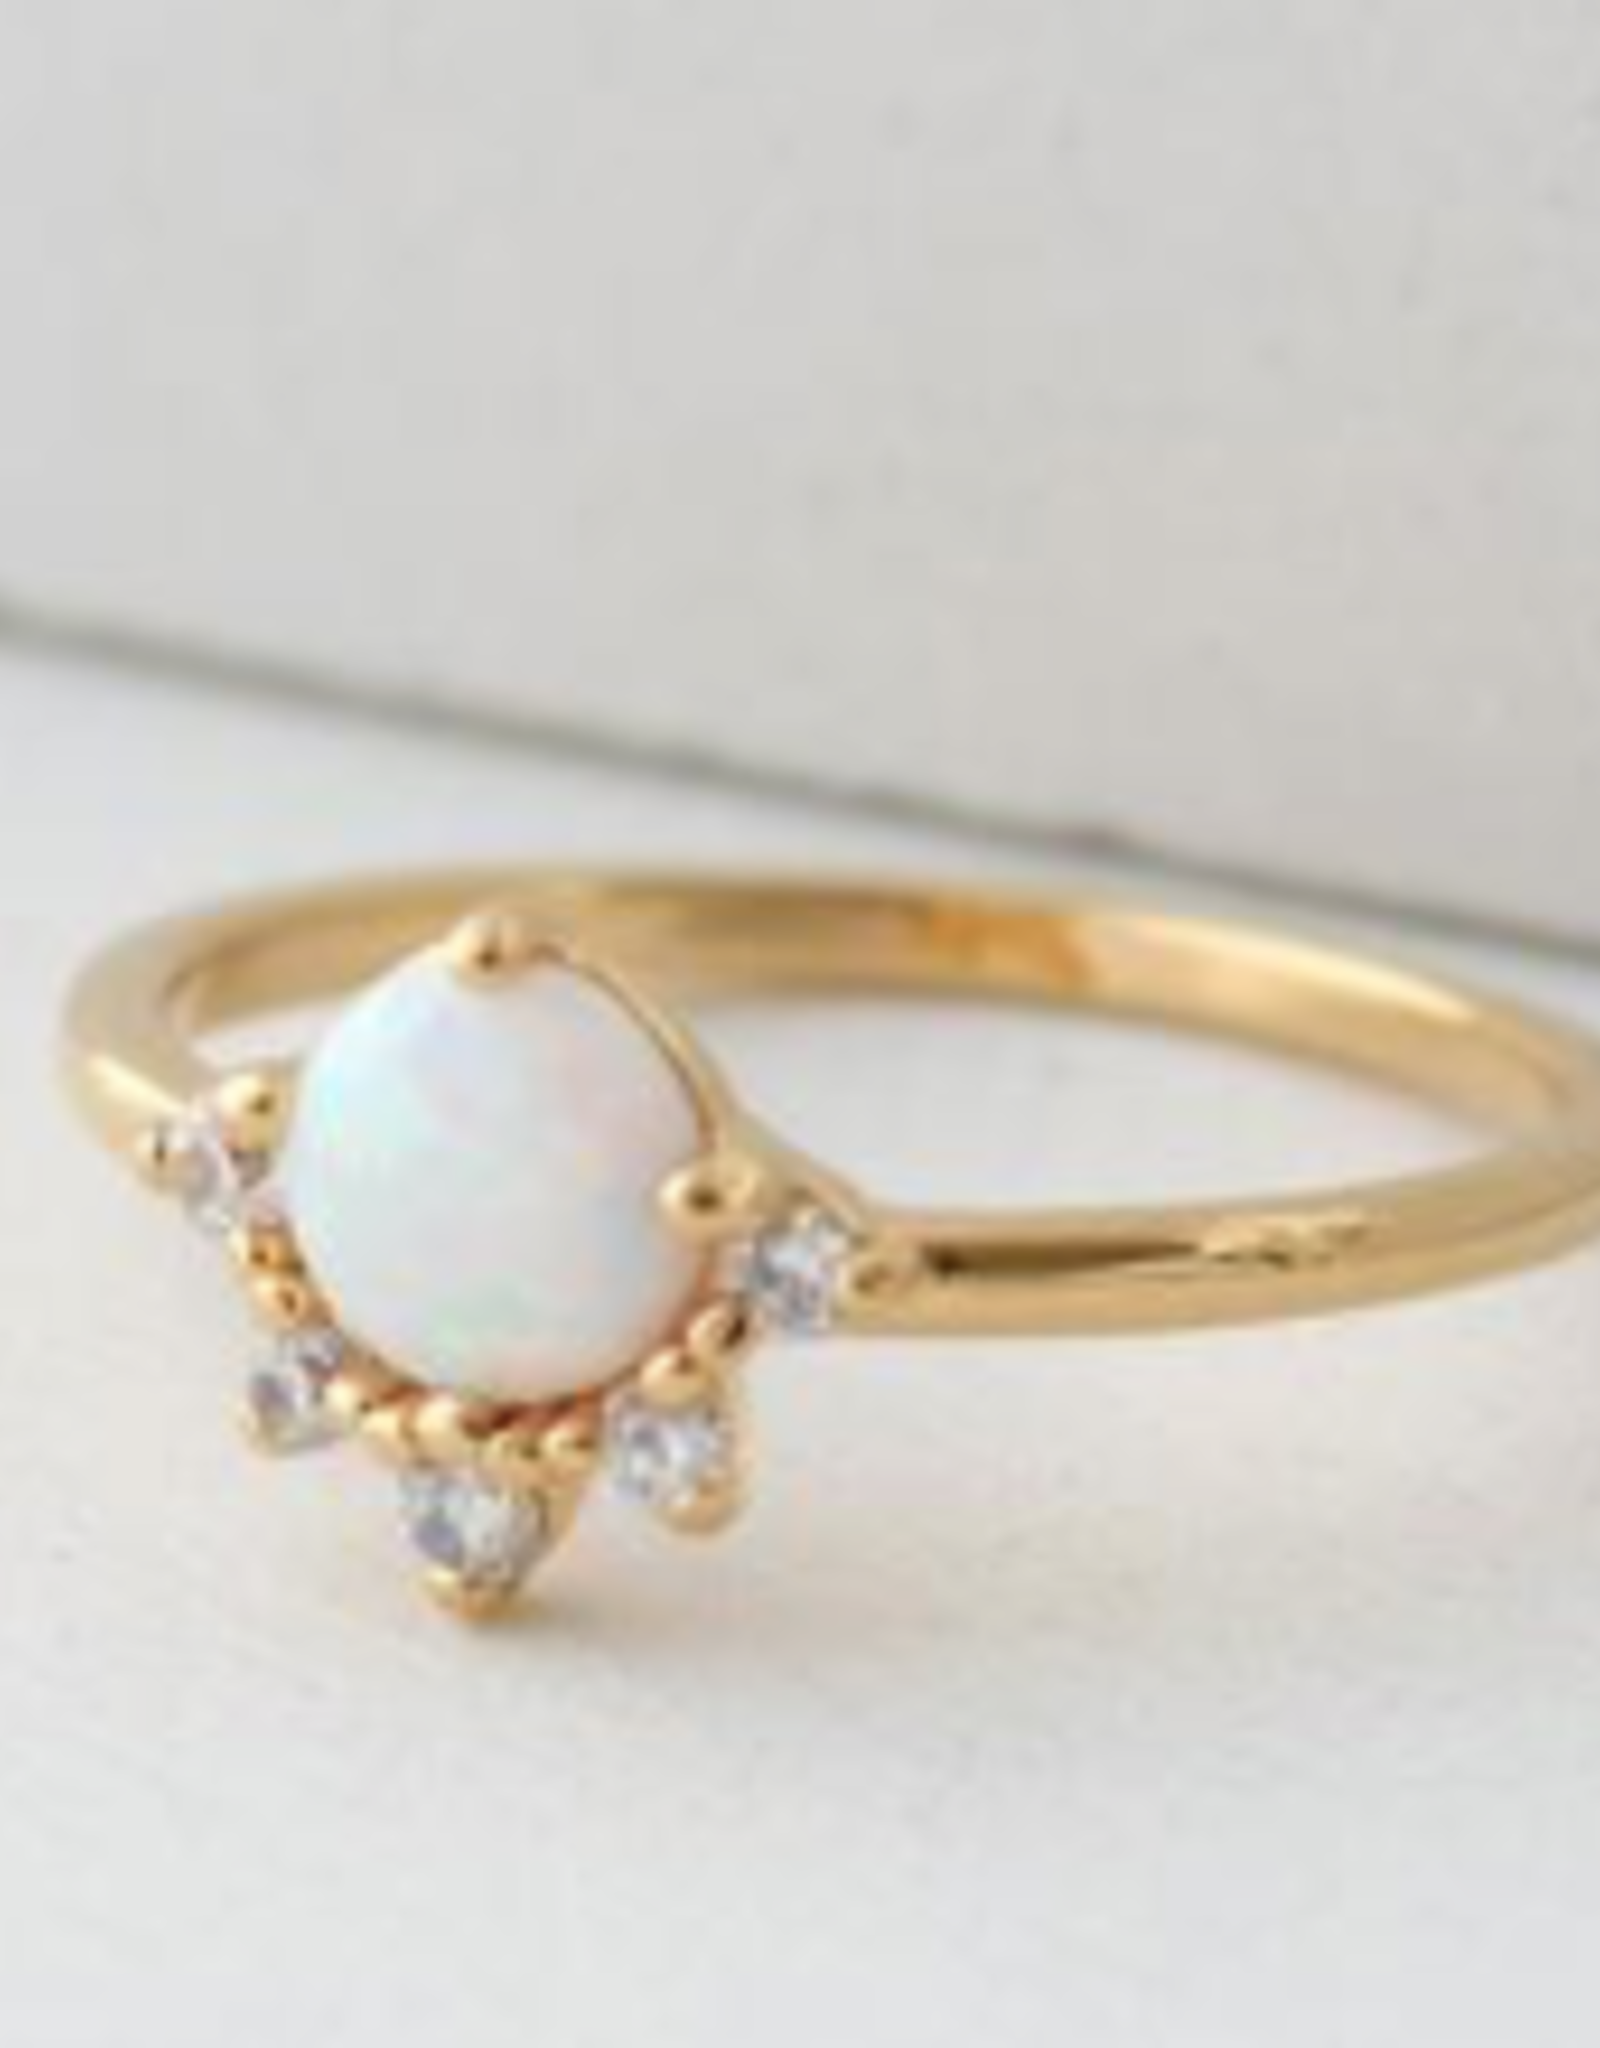 Juno Ring Size 6 - Opal